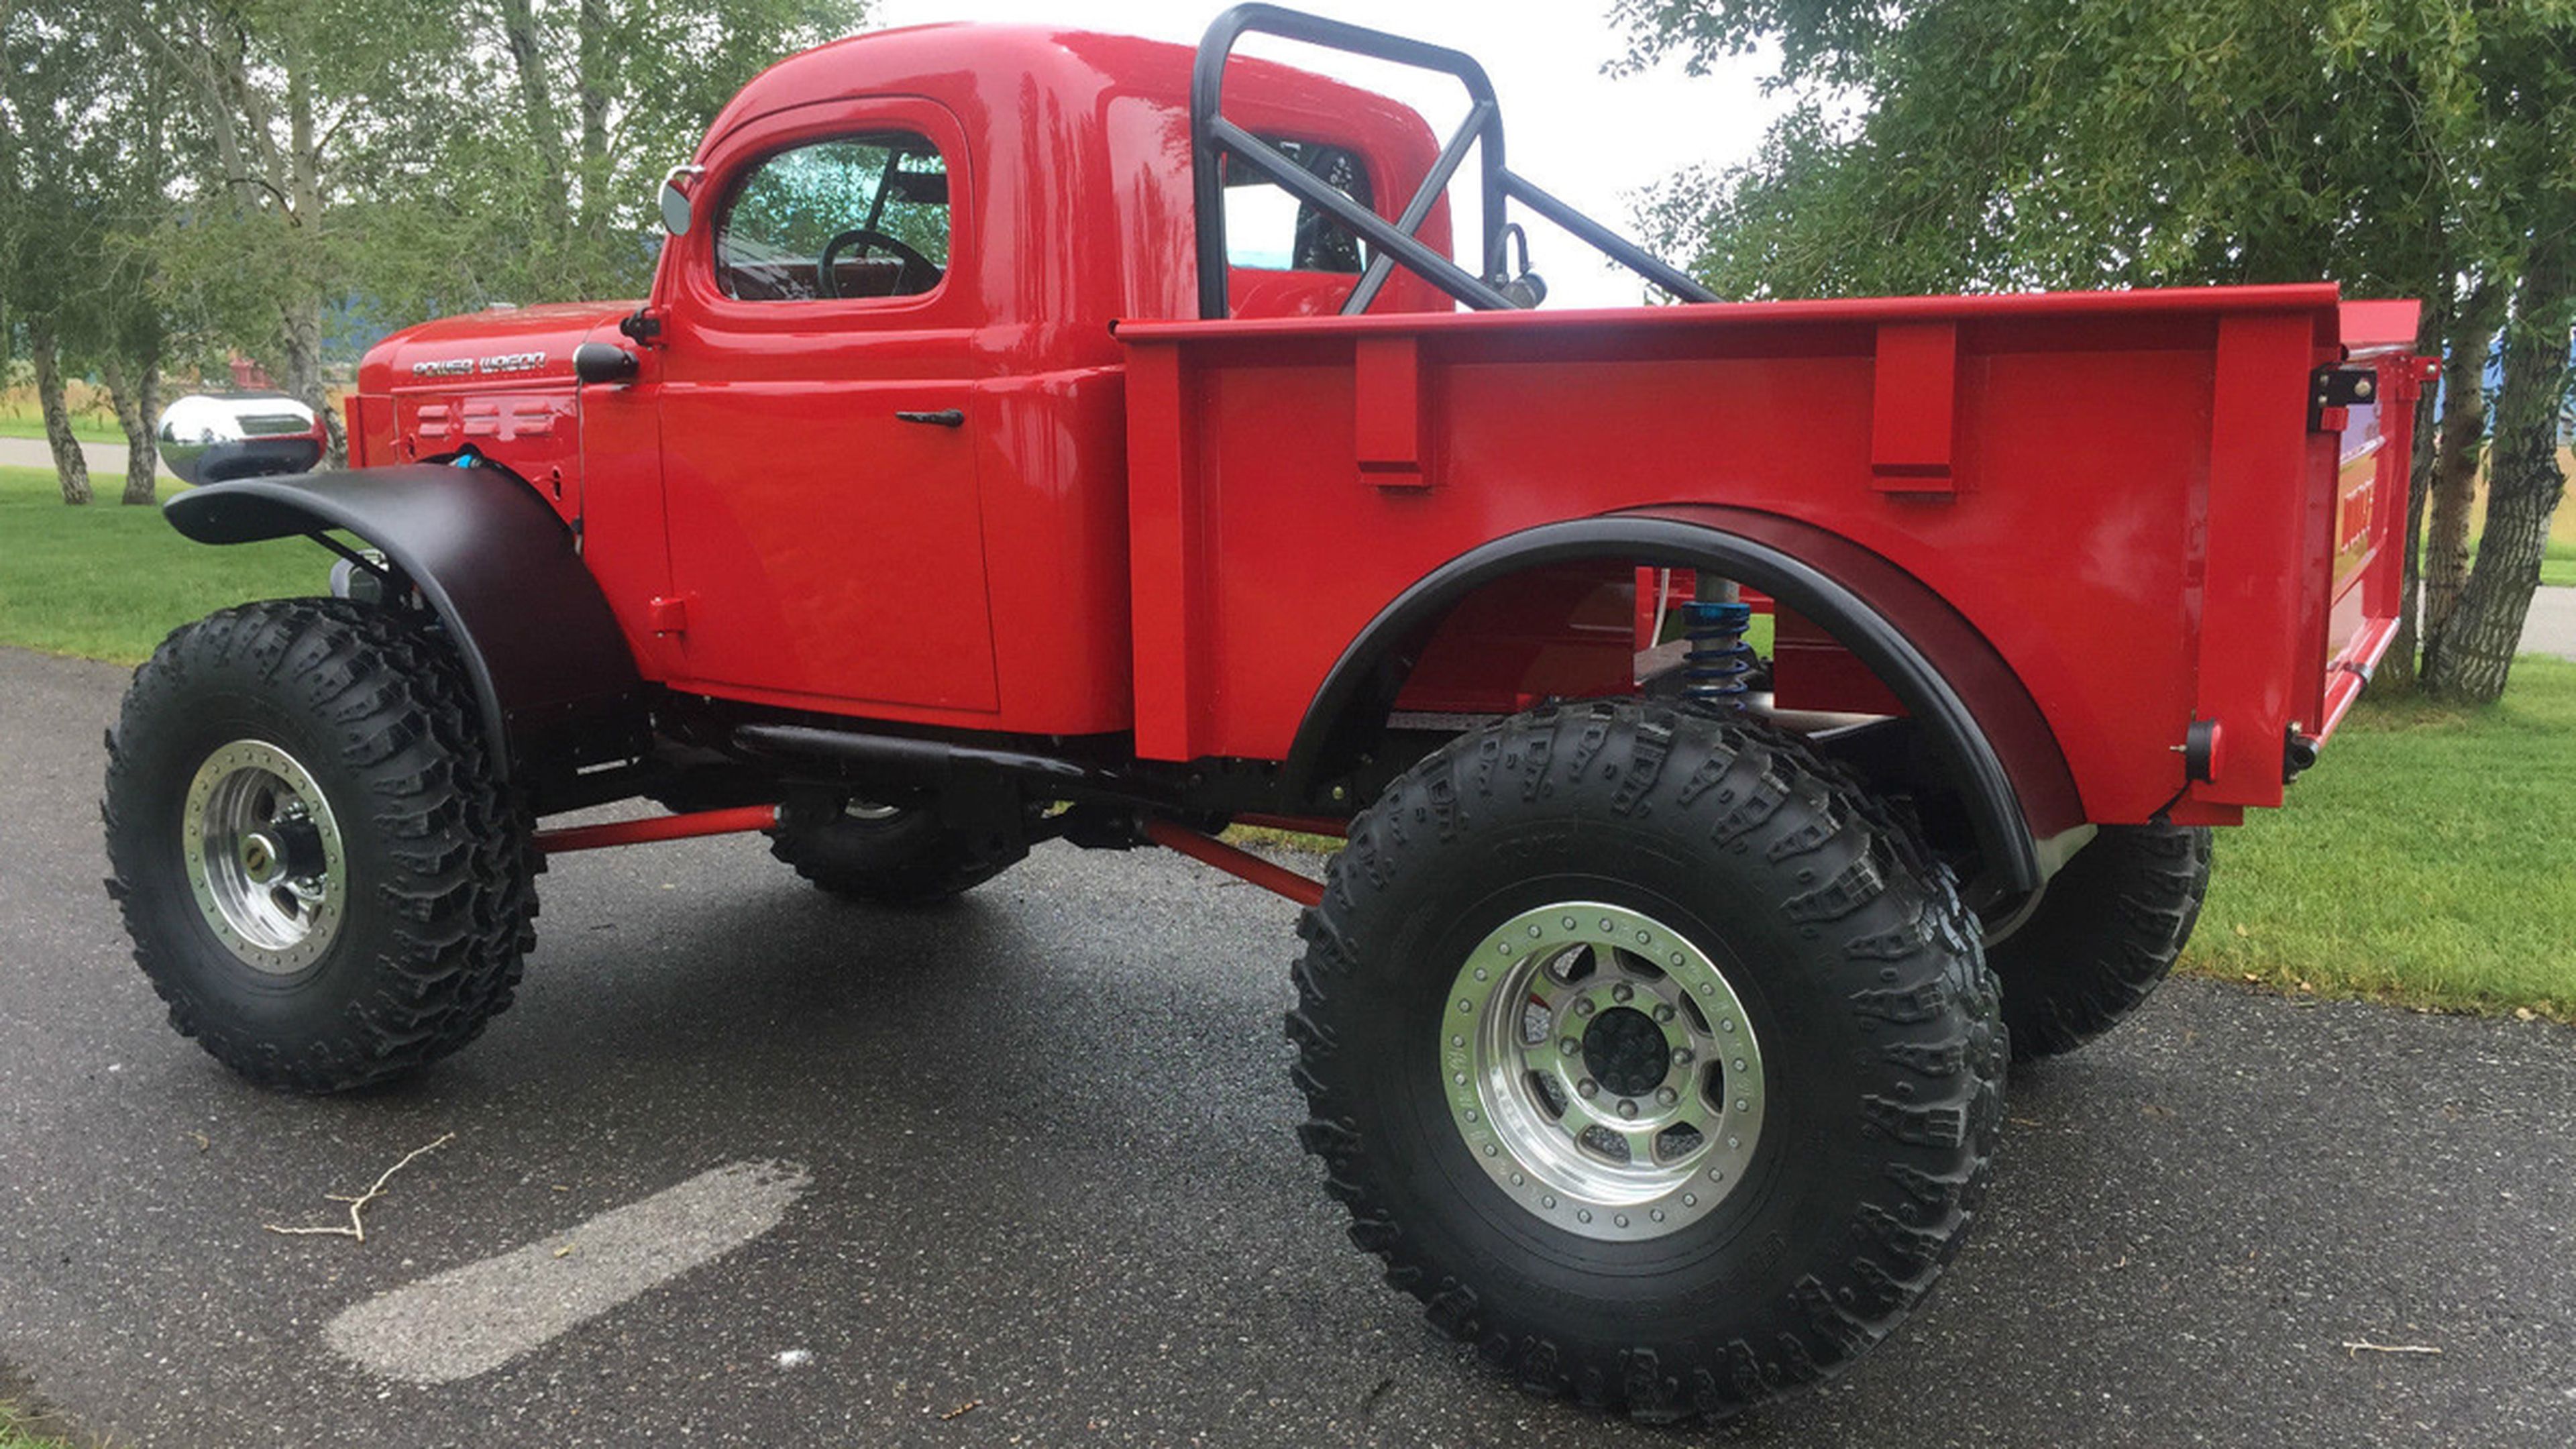 Dodge Power Wagon lateral